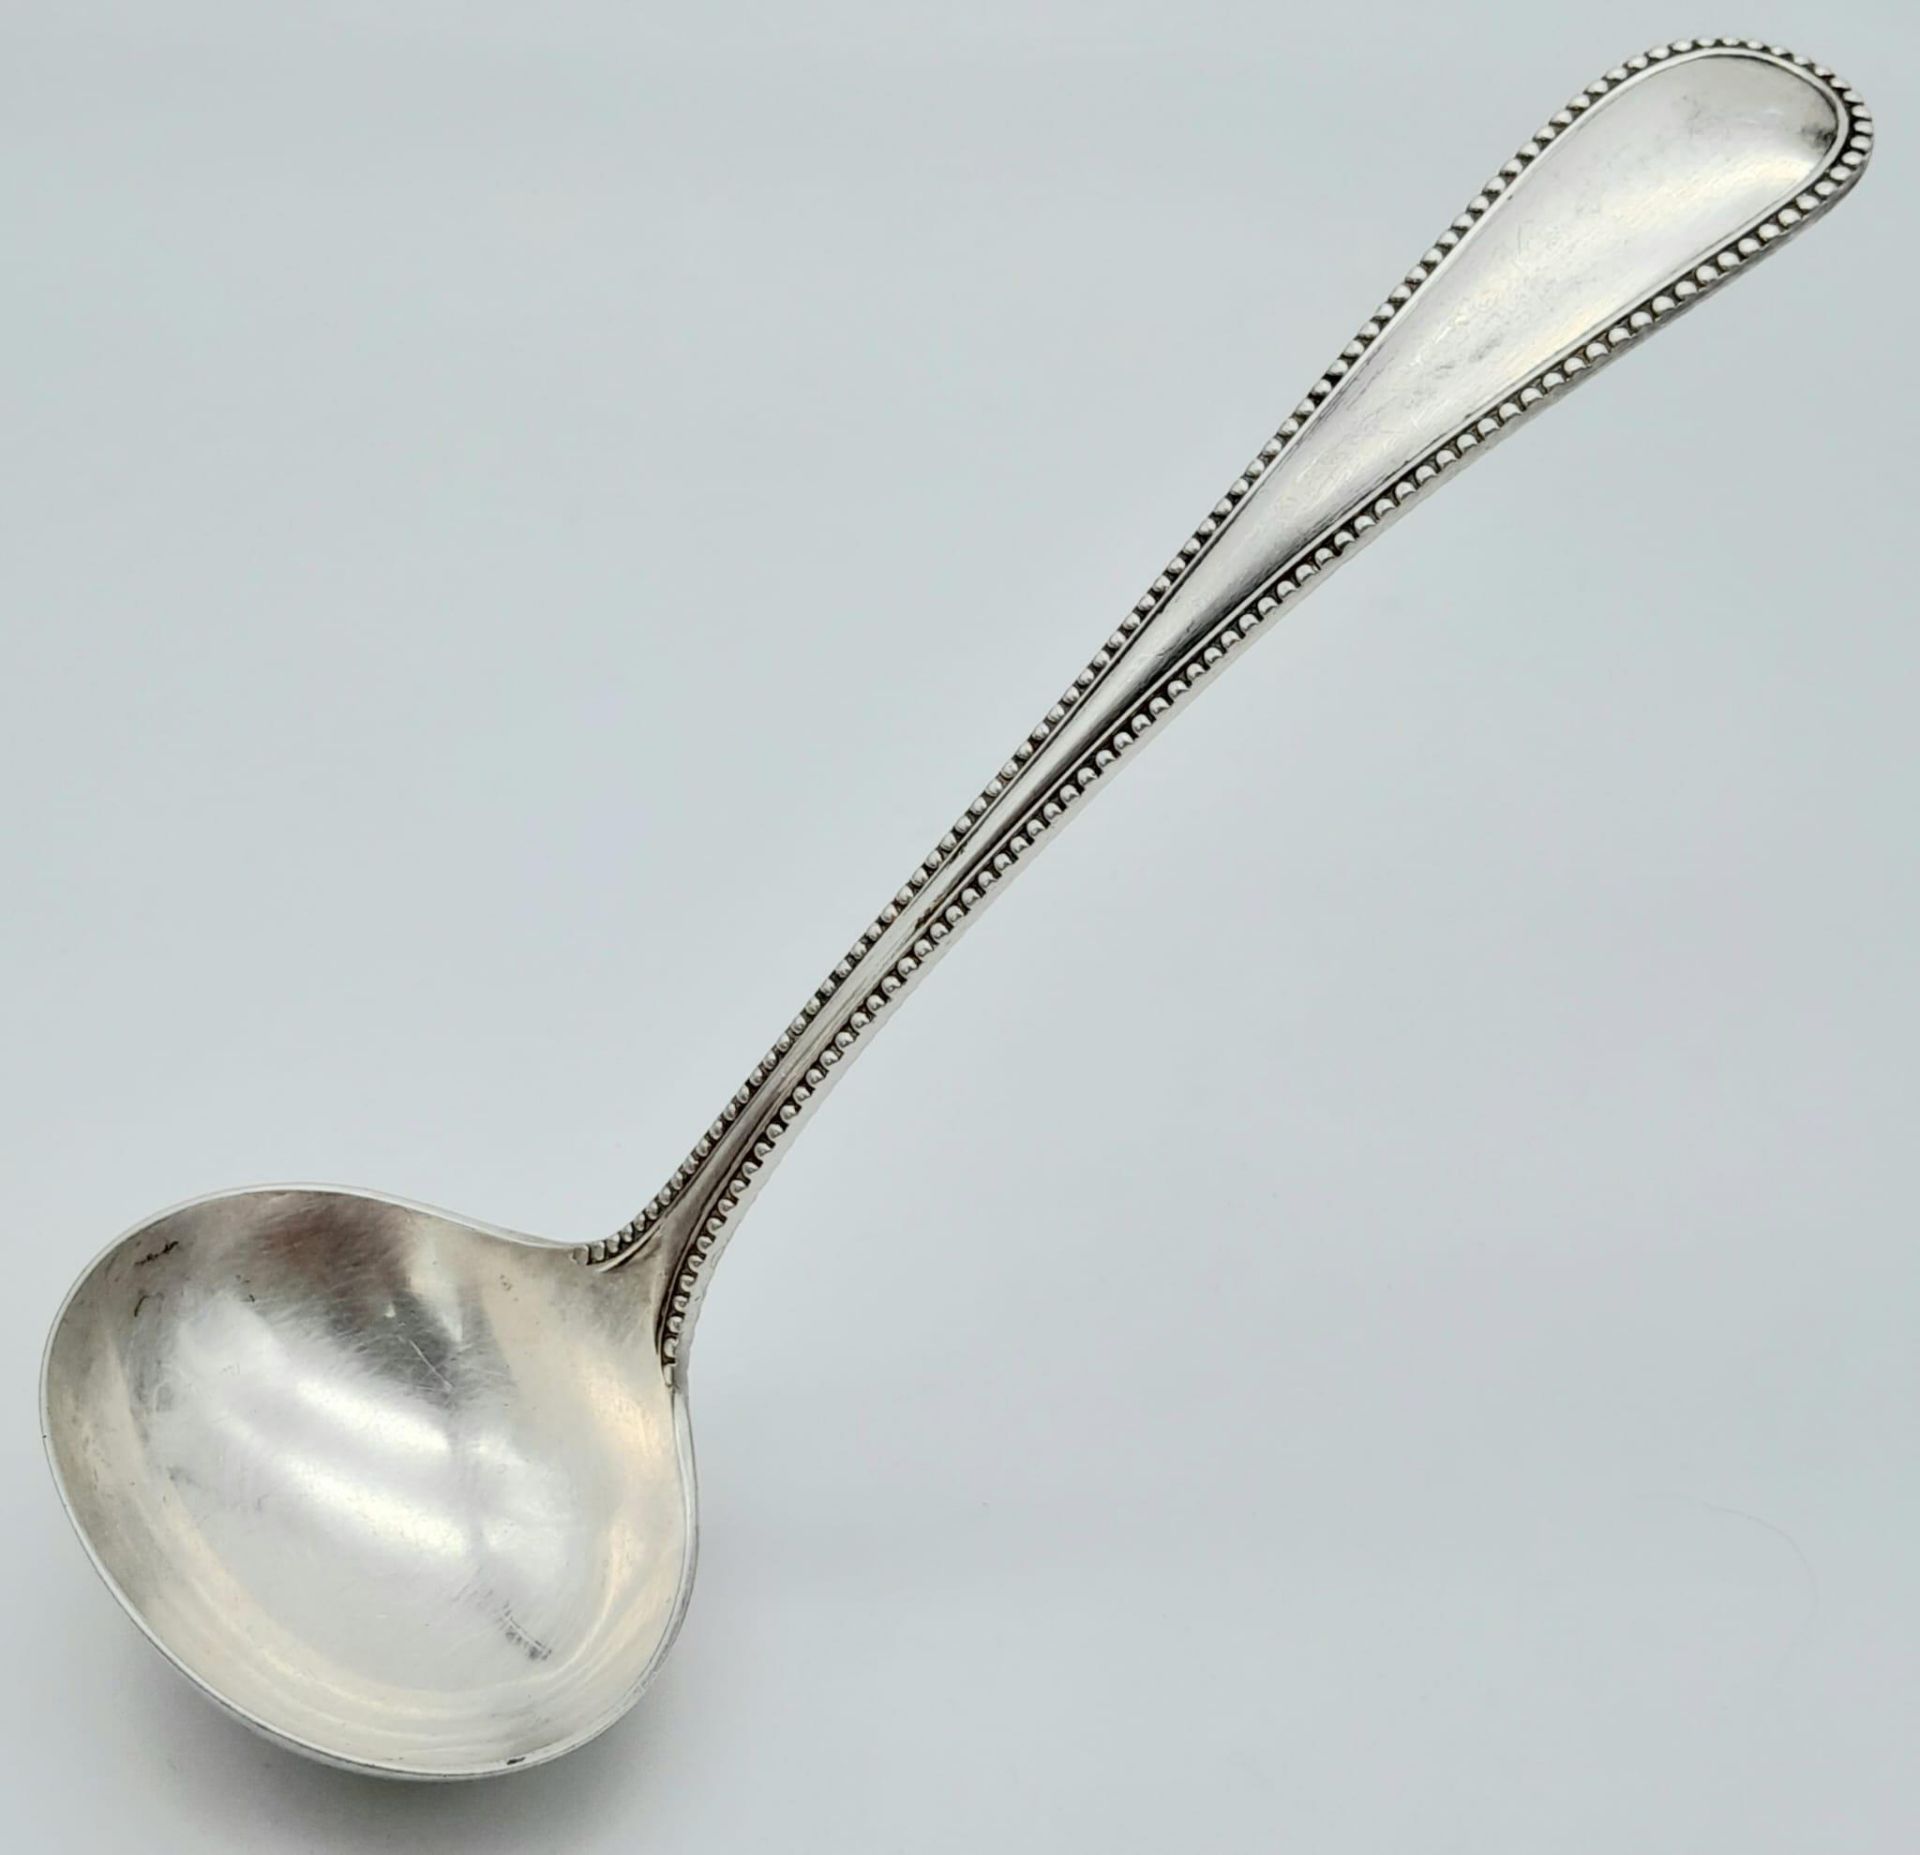 An antique Silver Ladle. Fully hallmarked and measures 19.5cm in length. Weight: 91.36g